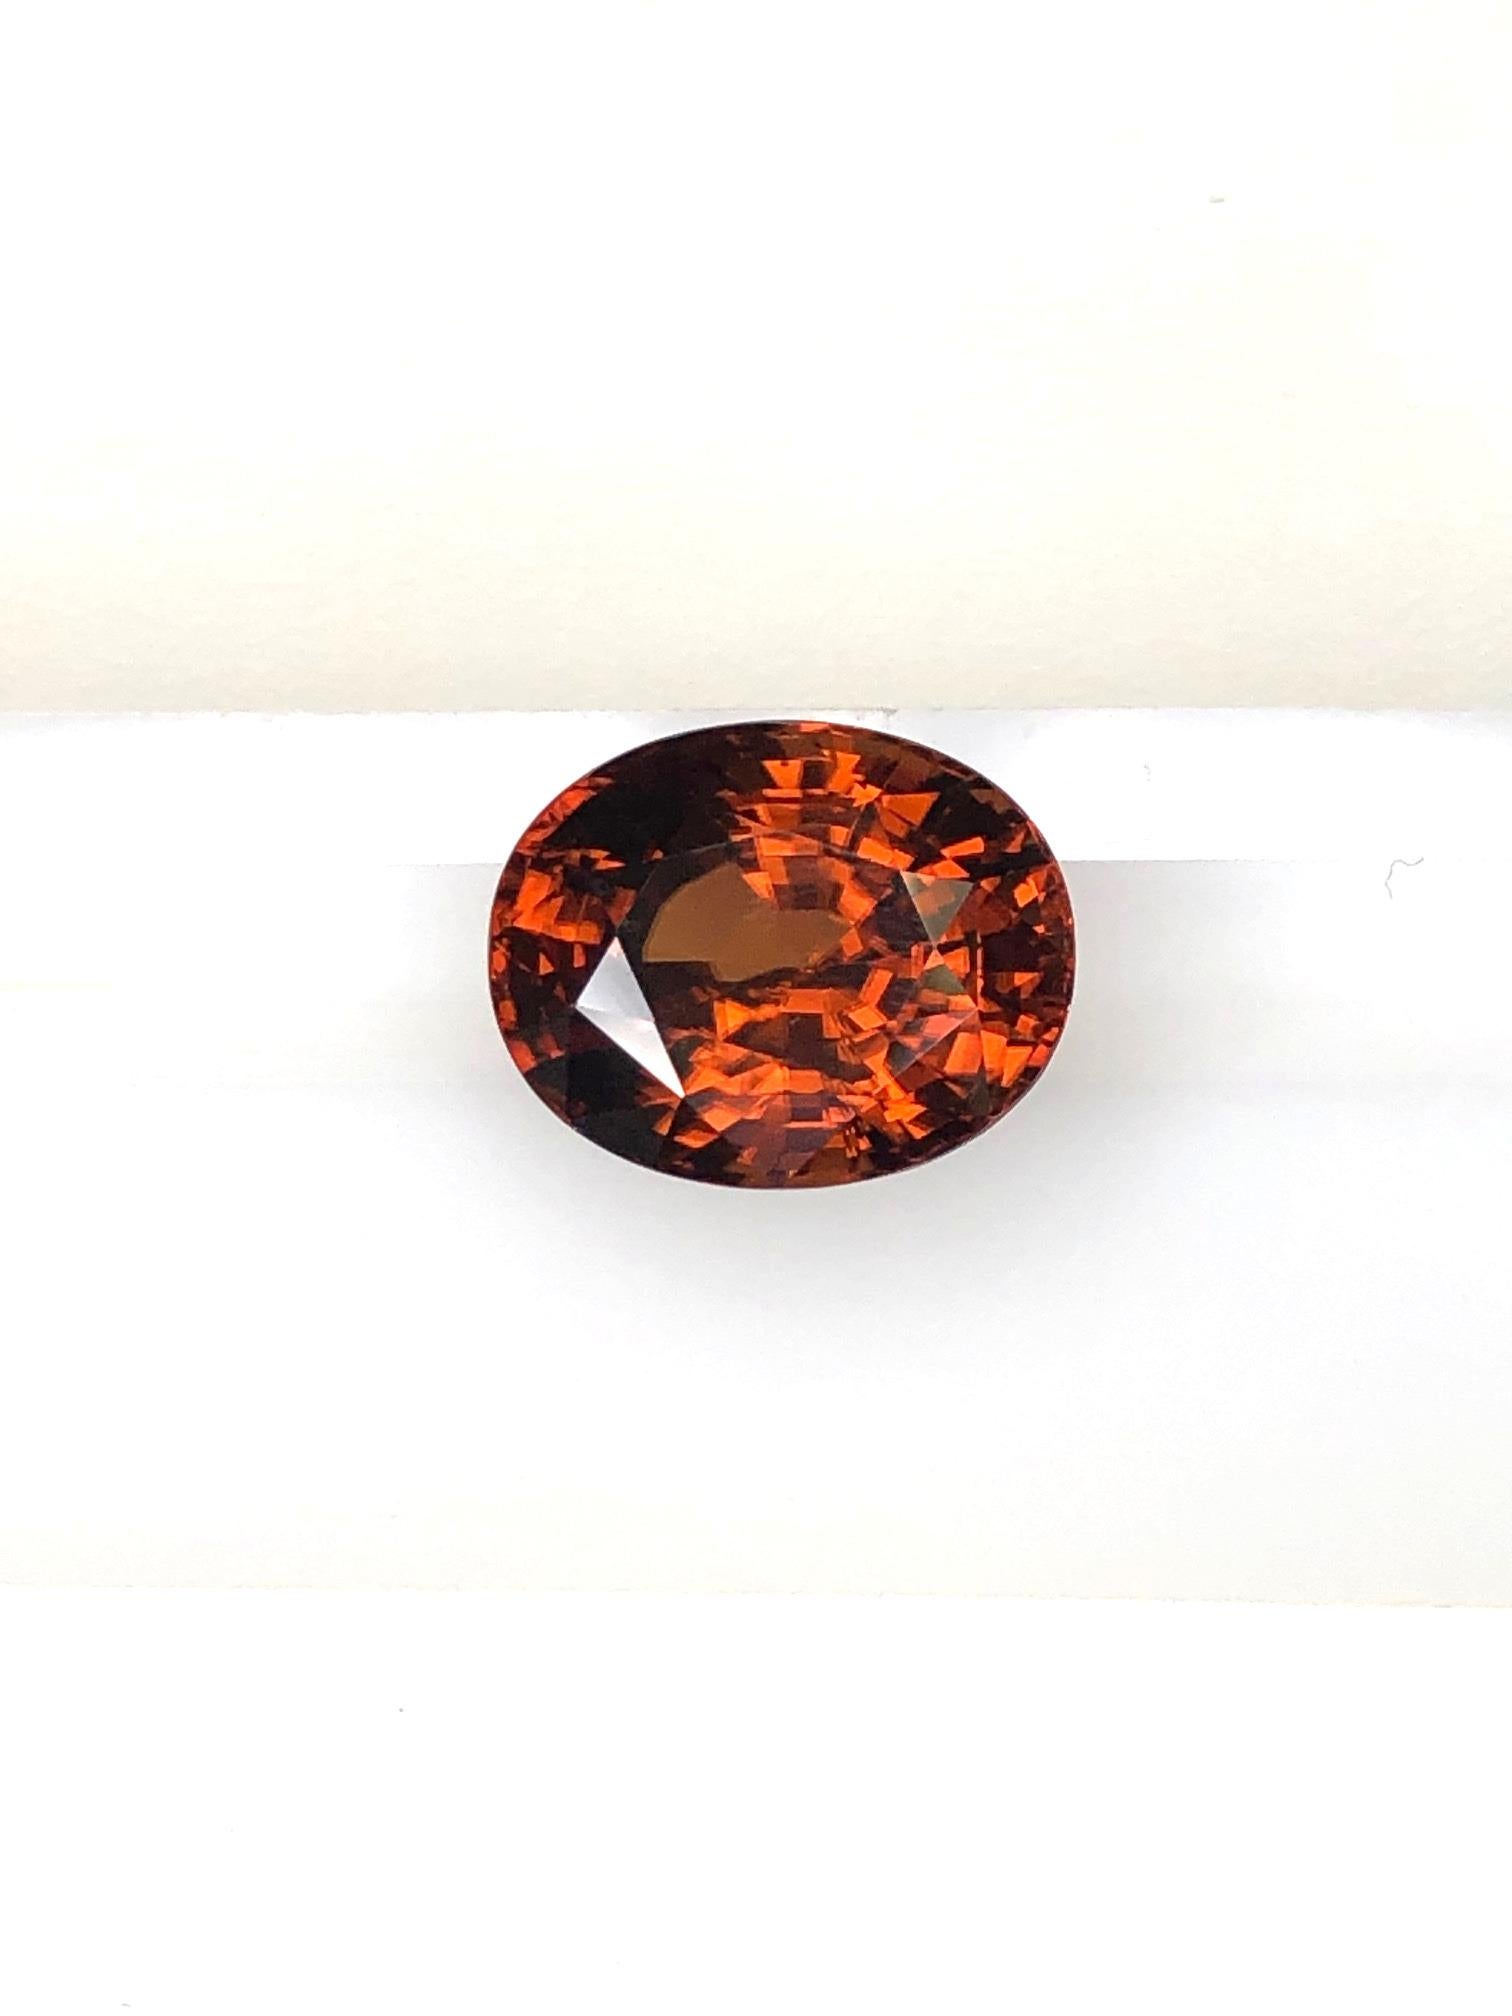 Privately Curated Zircon Collection, Unset Loose Gemstones,  347.05 Carats Total For Sale 8